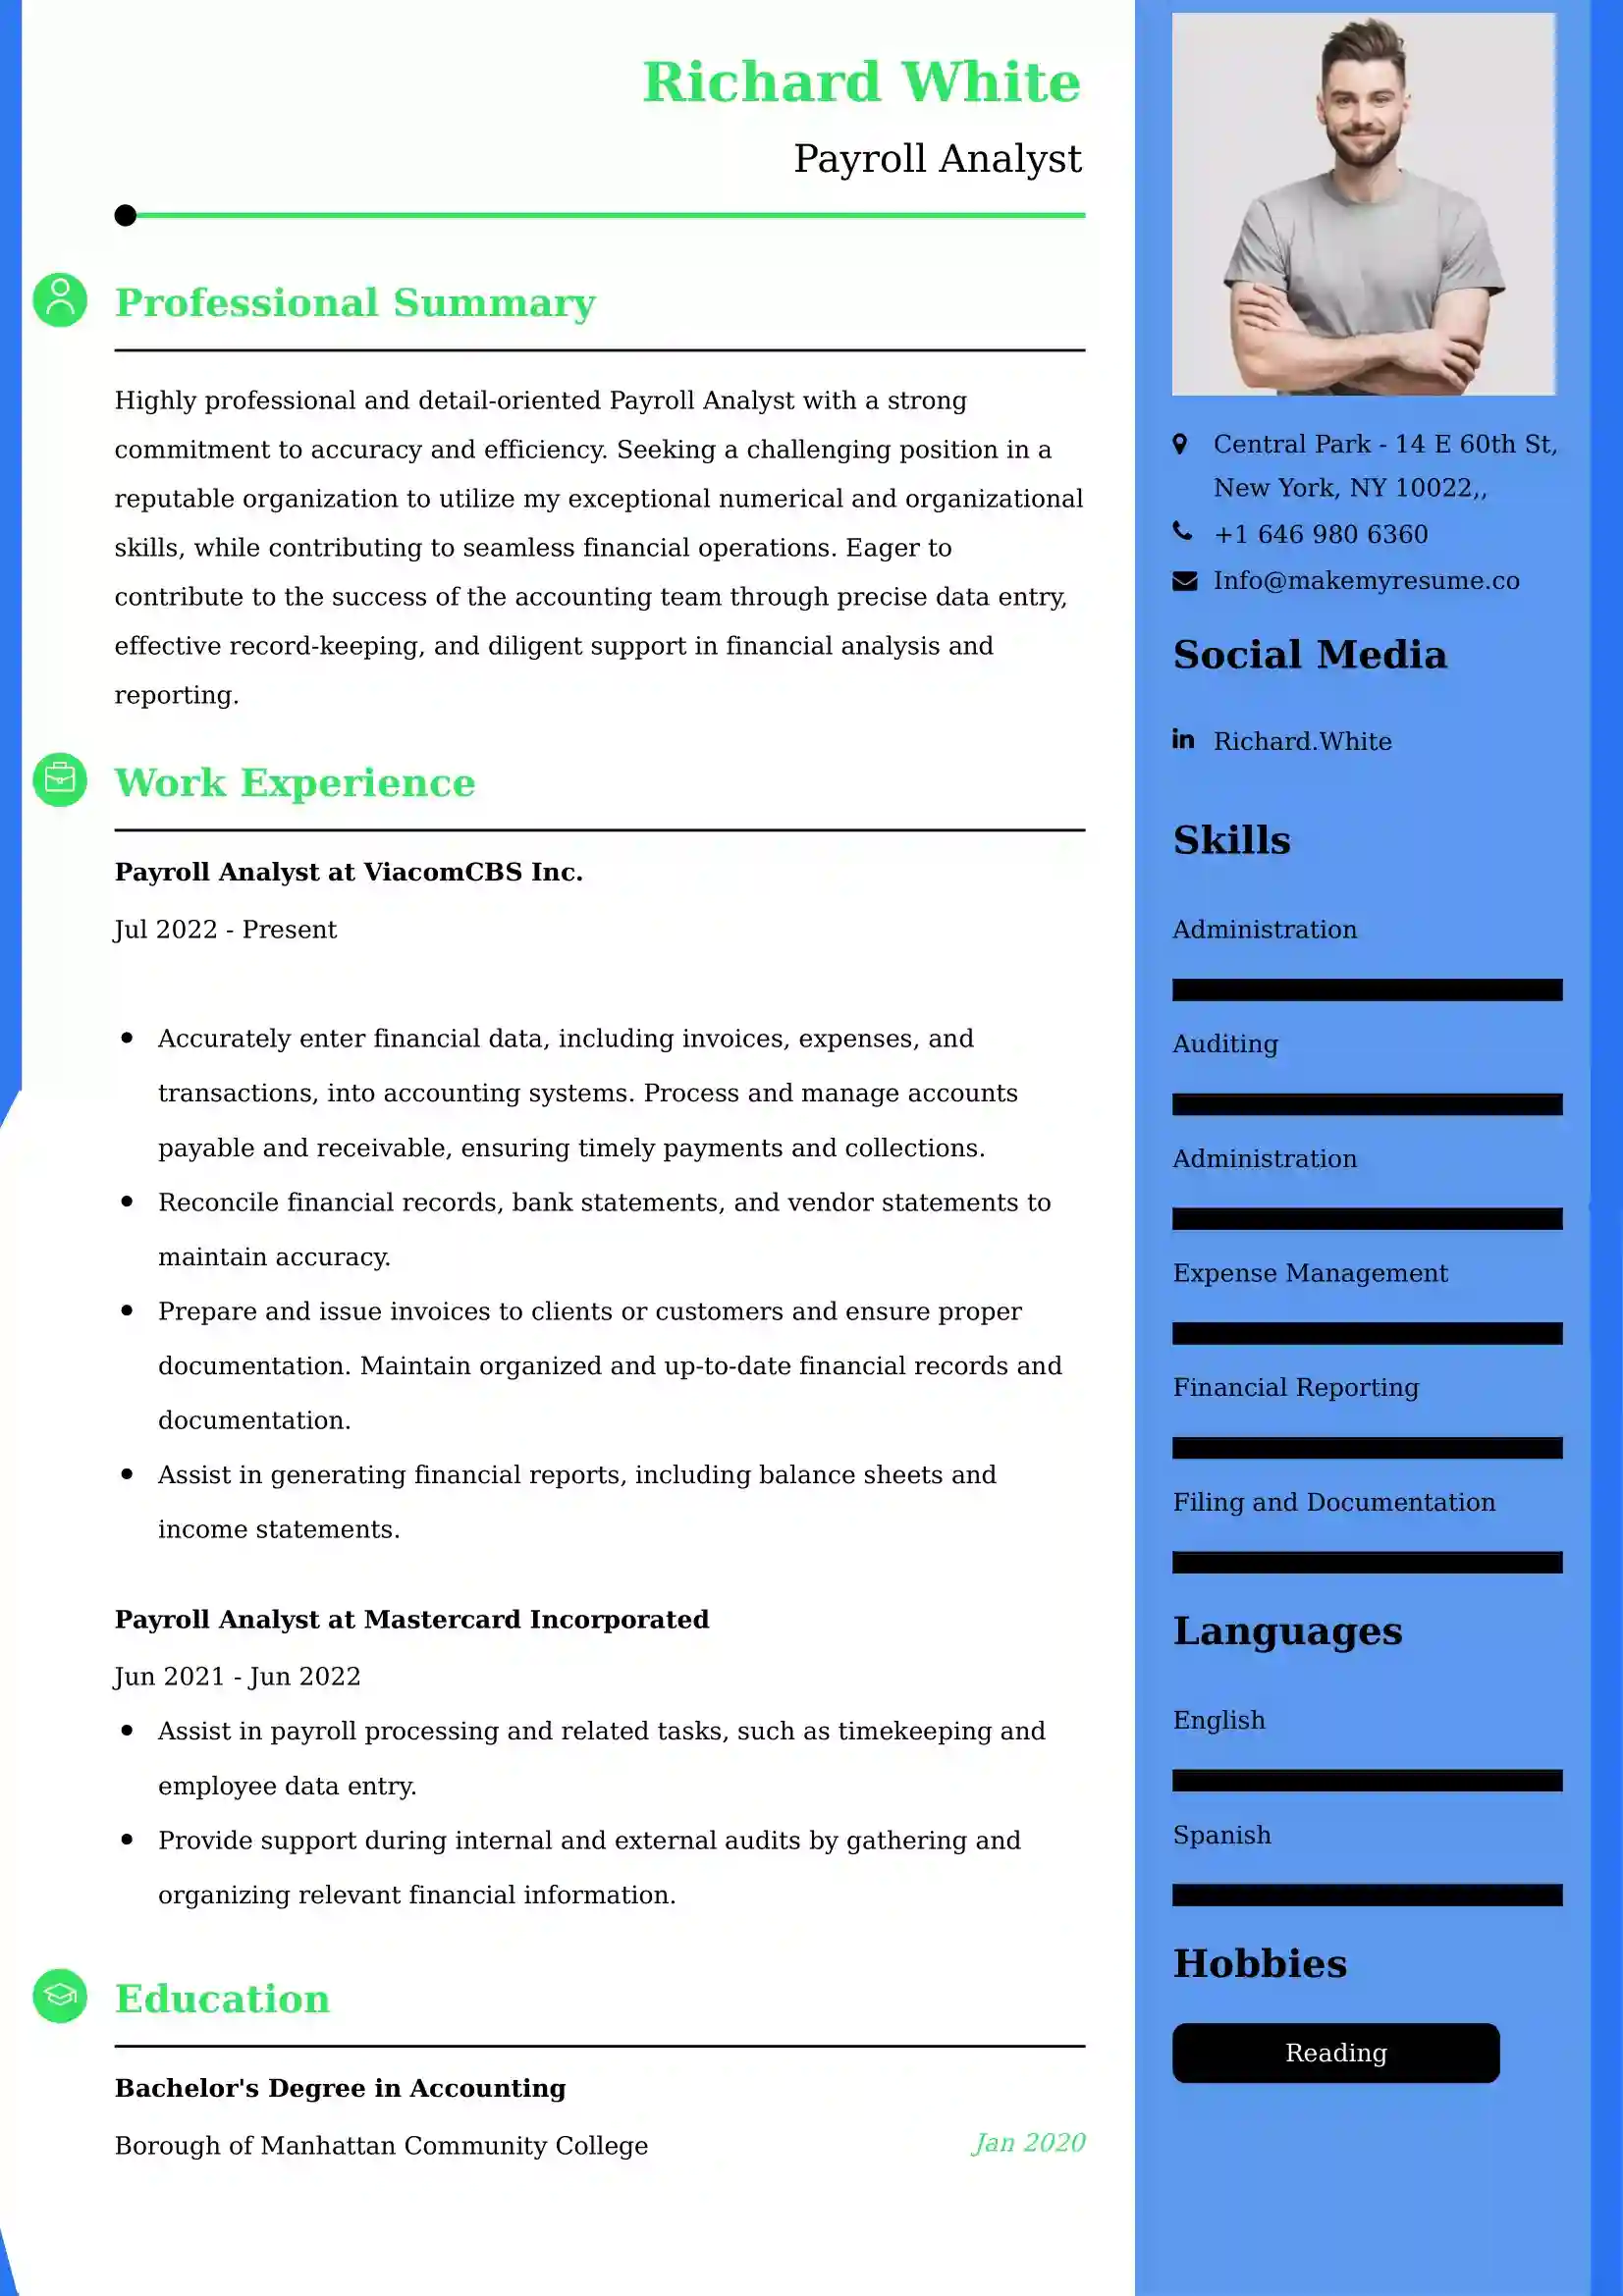 Payroll Analyst Resume Examples - UK Format, Latest Template.